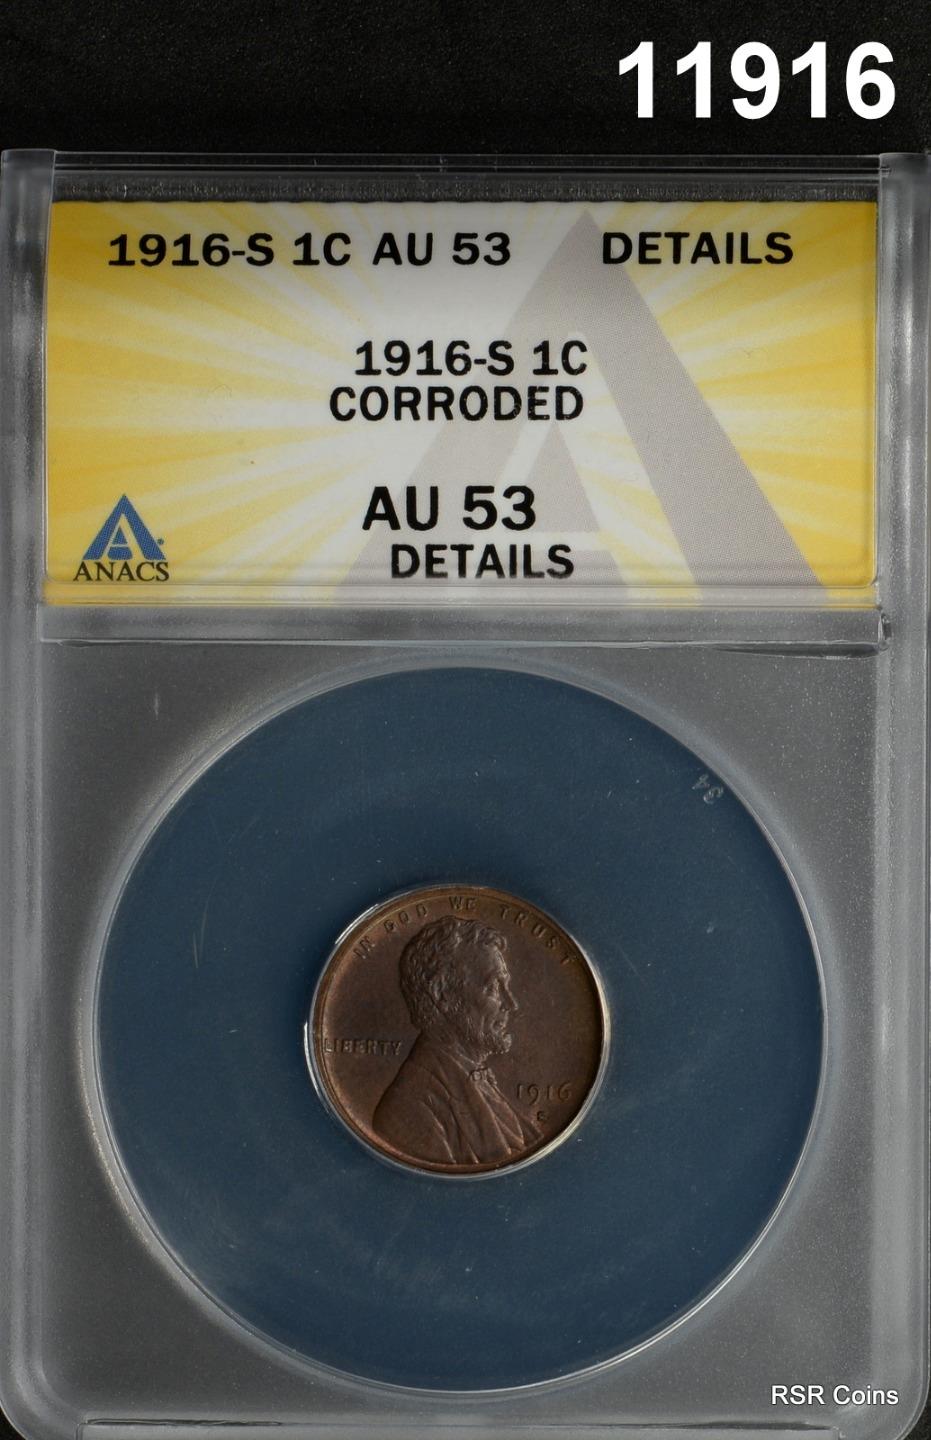 1916 S LINCOLN CENT ANACS CERTIFIED AU53 CORRODED LOOKS BETTER!! #11916